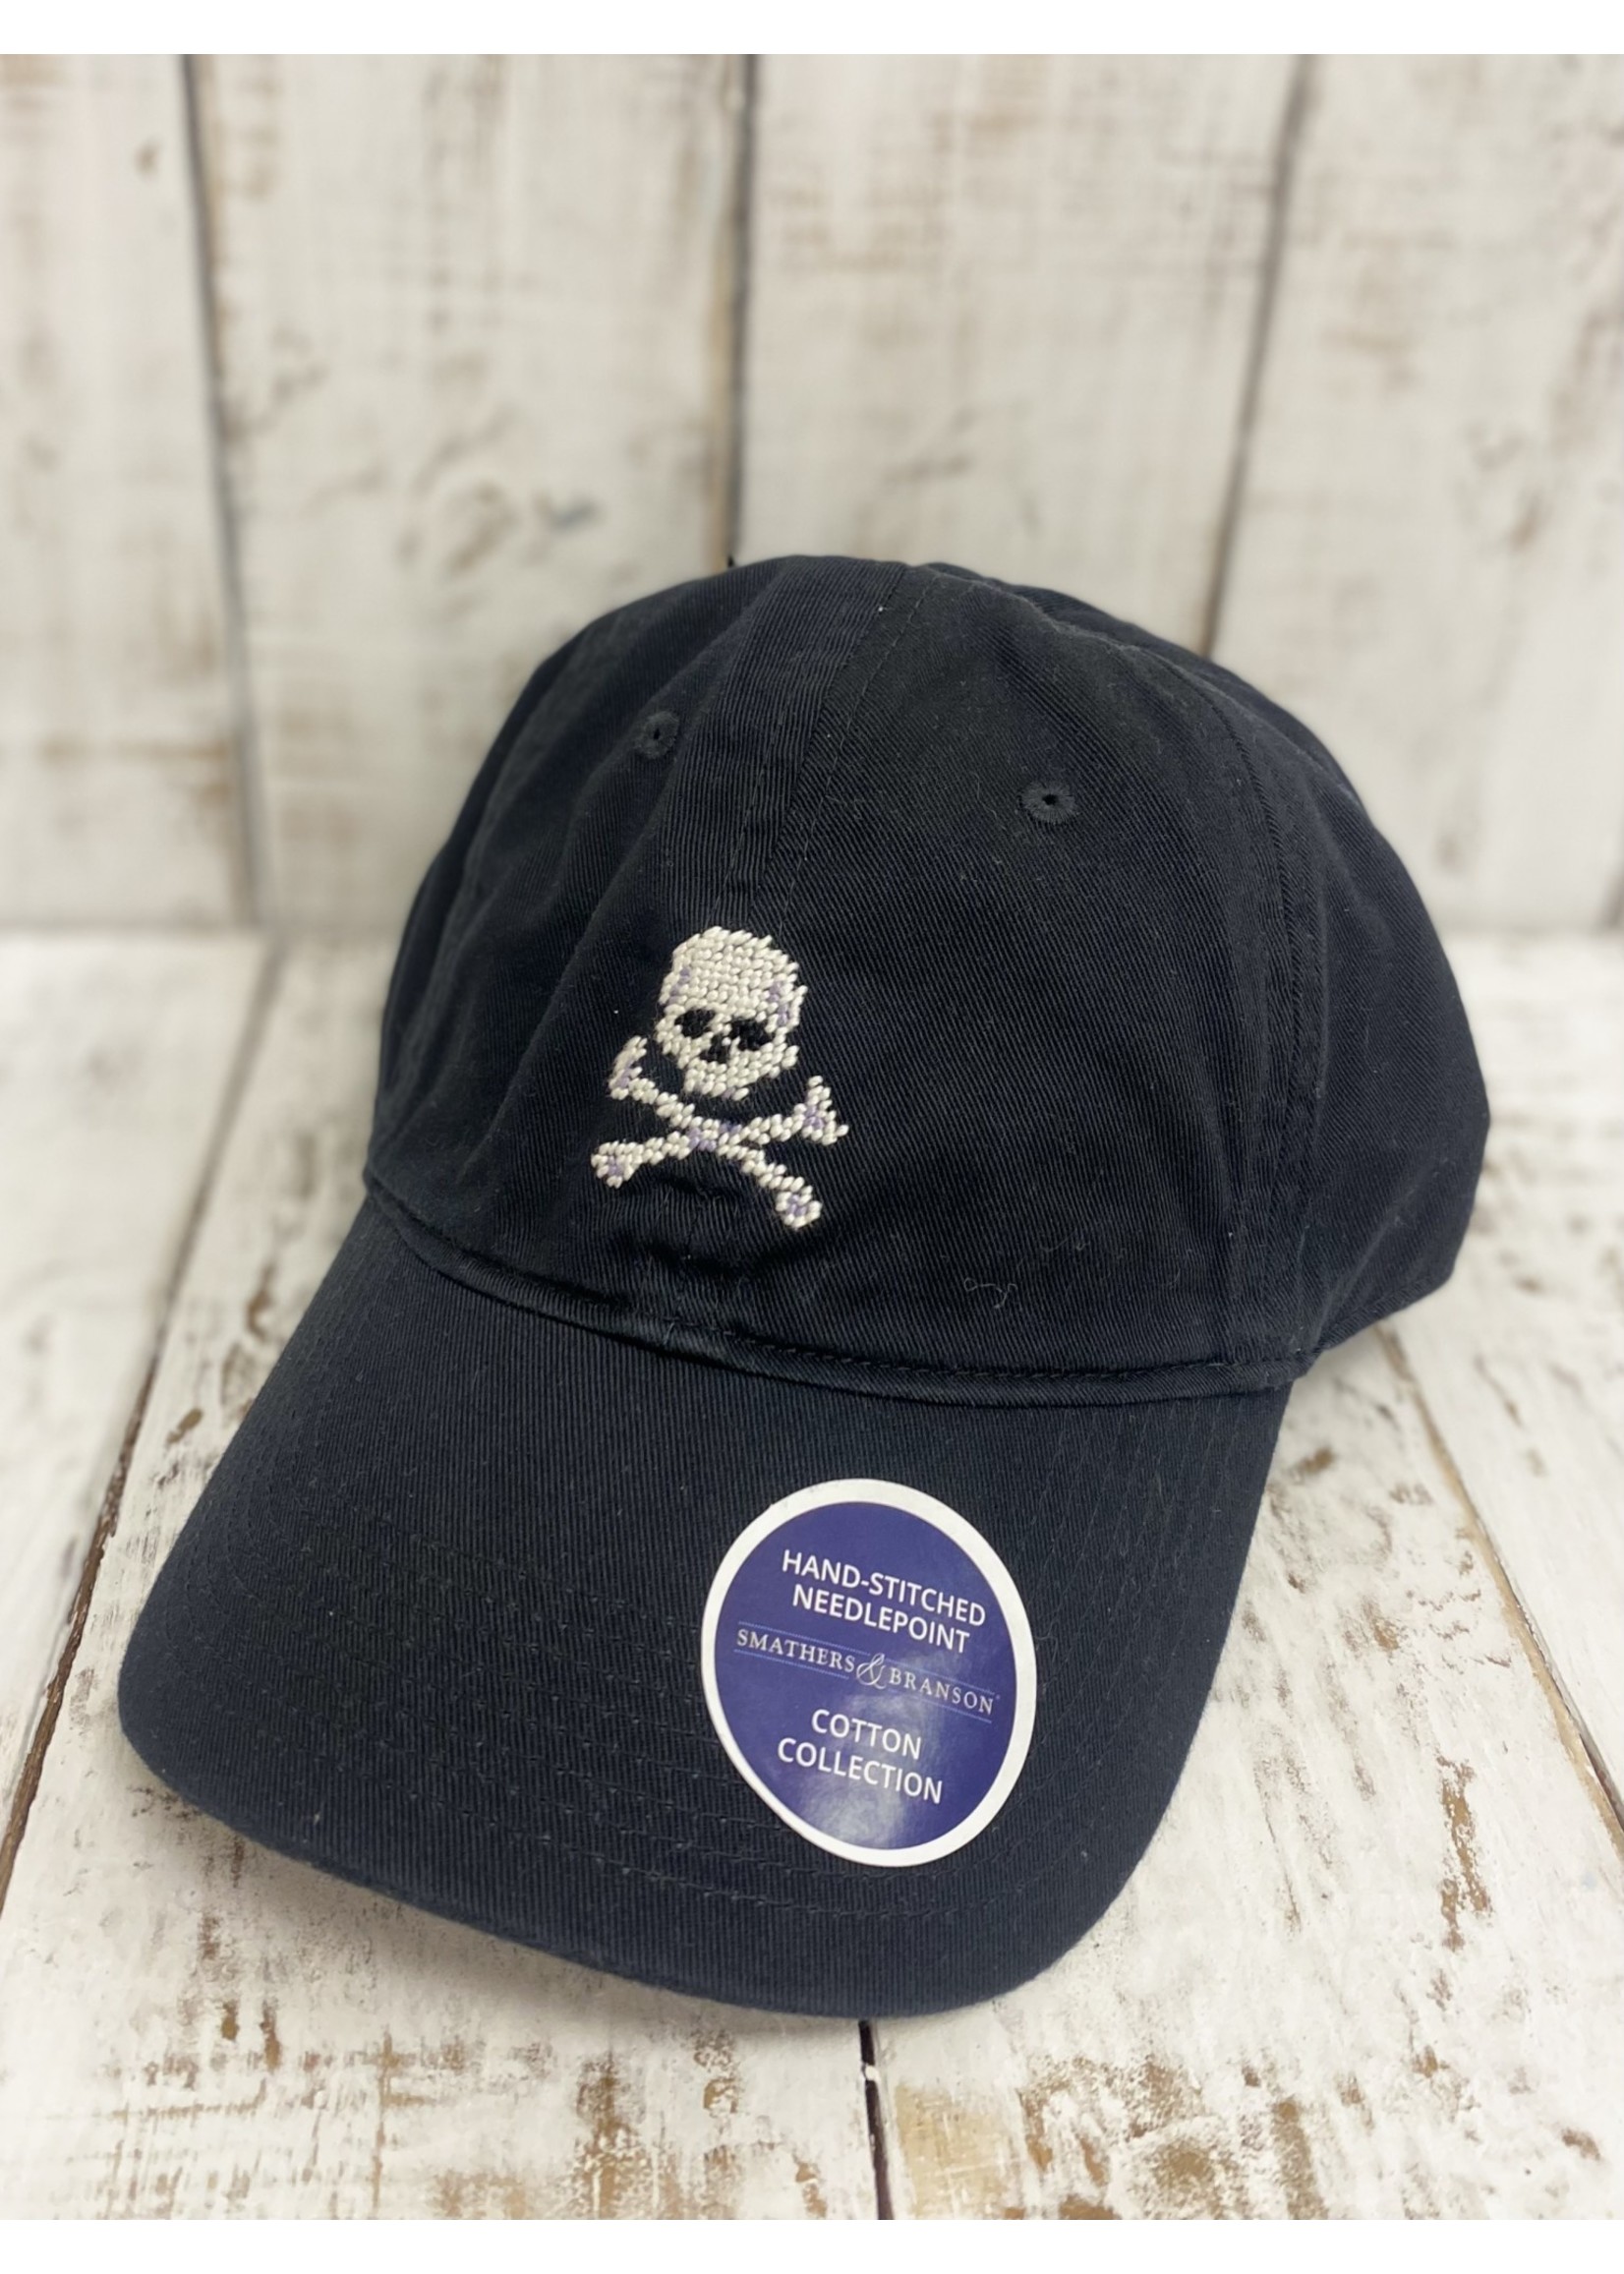 Smathers and Branson Jolly Roger Hat